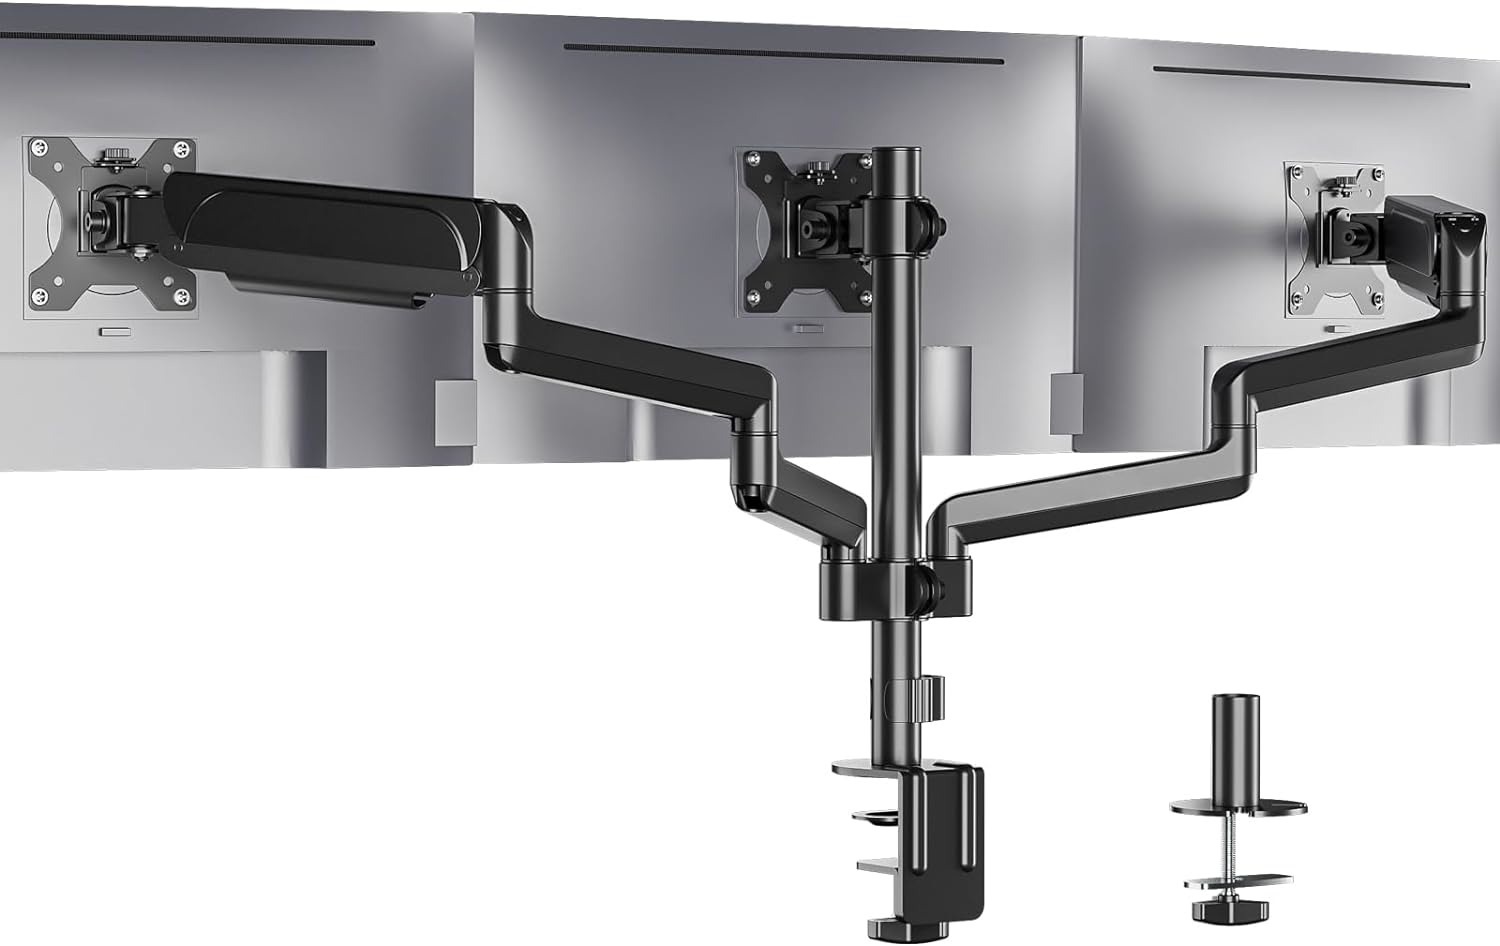 WALI Triple Monitor Mount, 3 Monitor Stand Desk Mount with Premium Gas Spring Ar